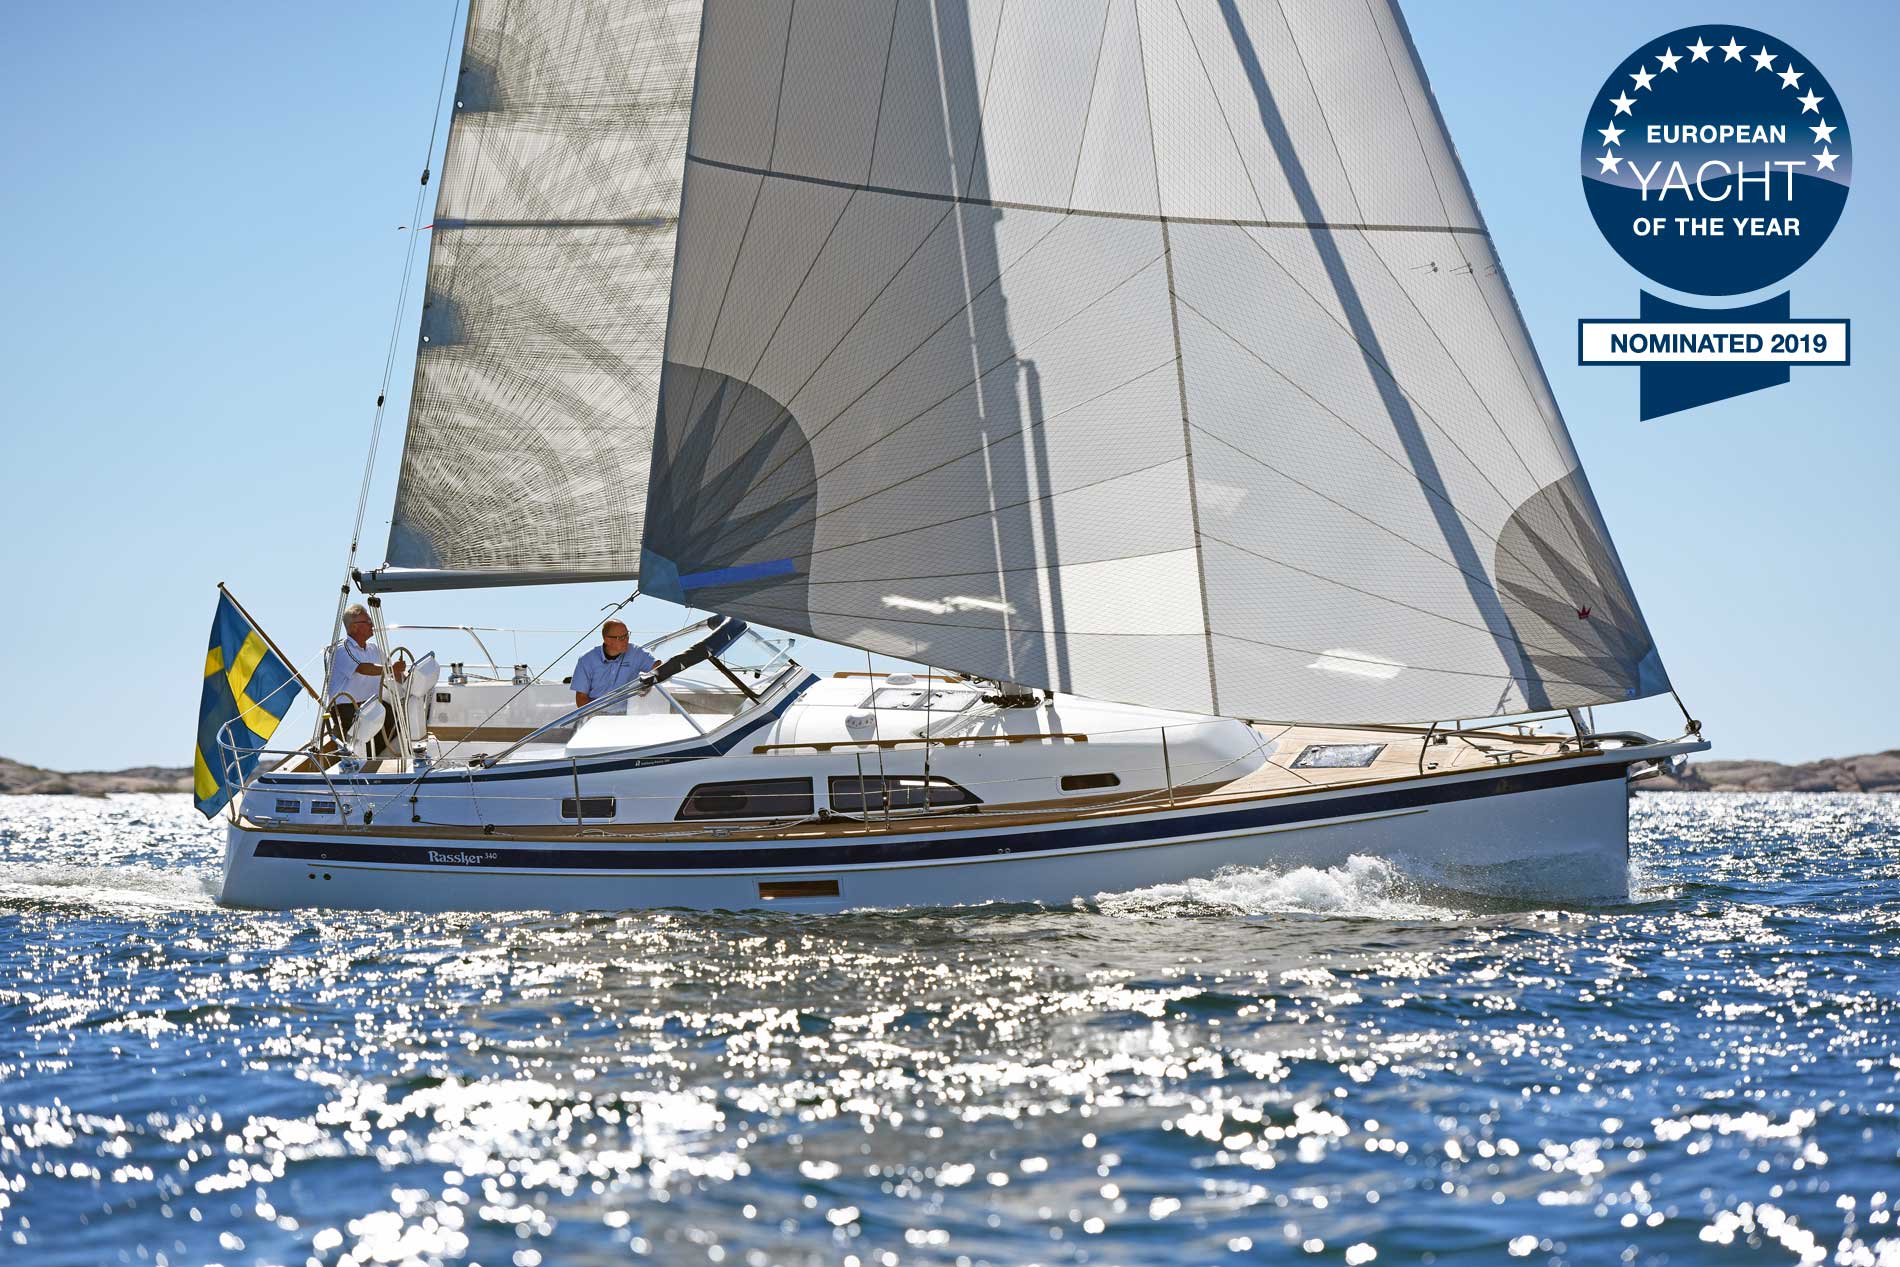 Hallberg-Rassy 340 nominated for European Yacht of the Year